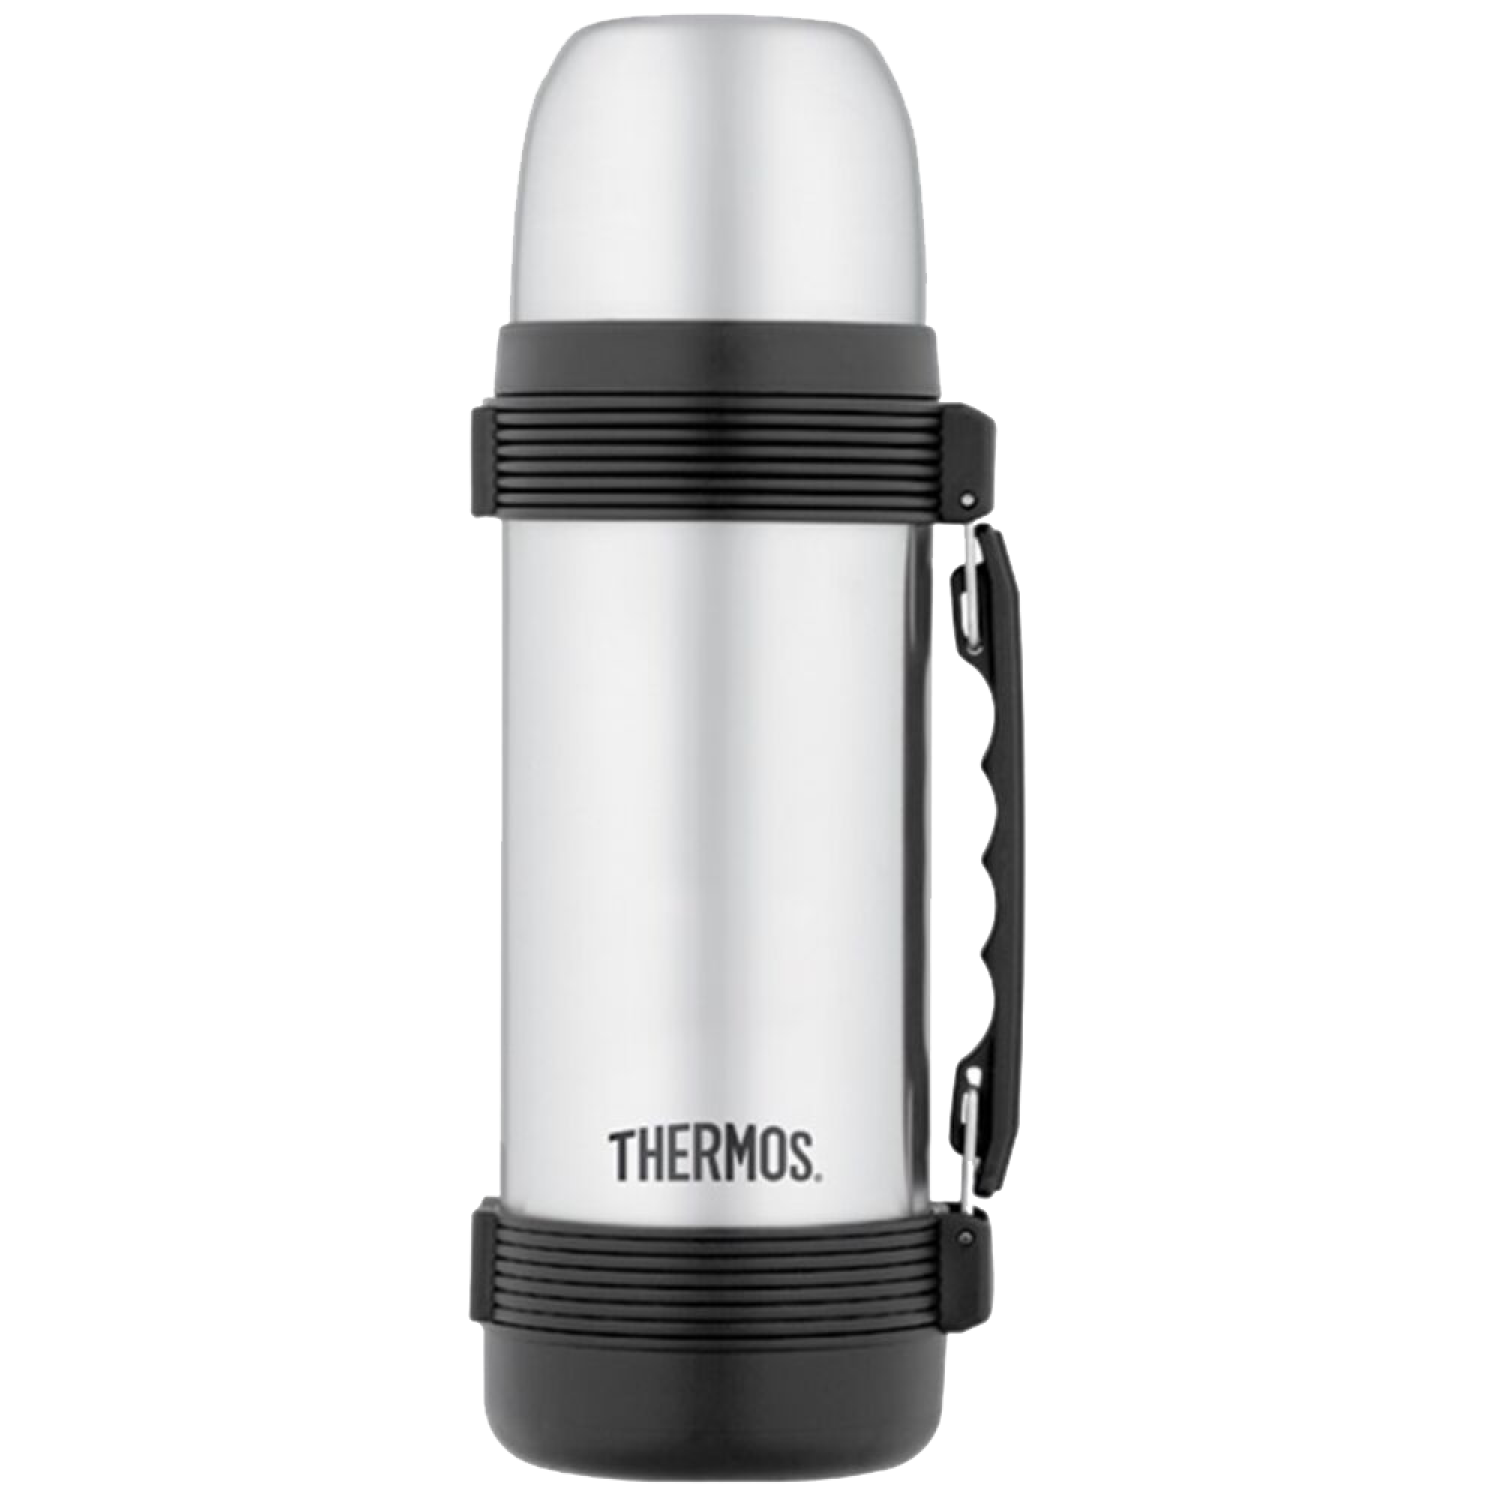 Термос Thermos 2550 Stainless Steel 1,0л Steel термос thermos fdh stainless steel vacuum flask 1 4l 923639